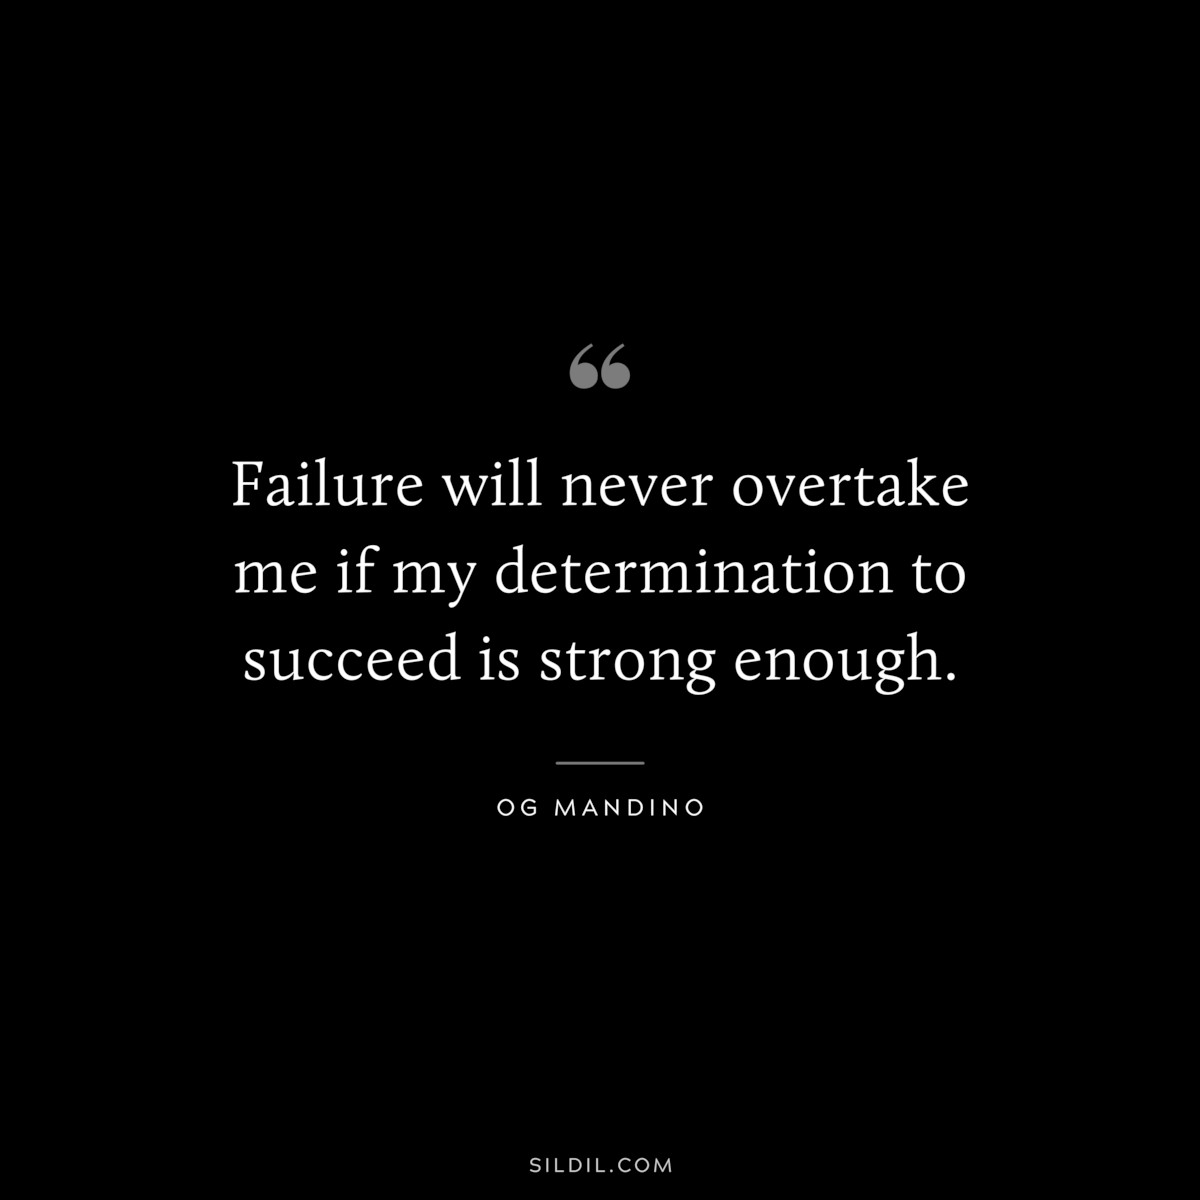 Failure will never overtake me if my determination to succeed is strong enough. ― Og Mandino